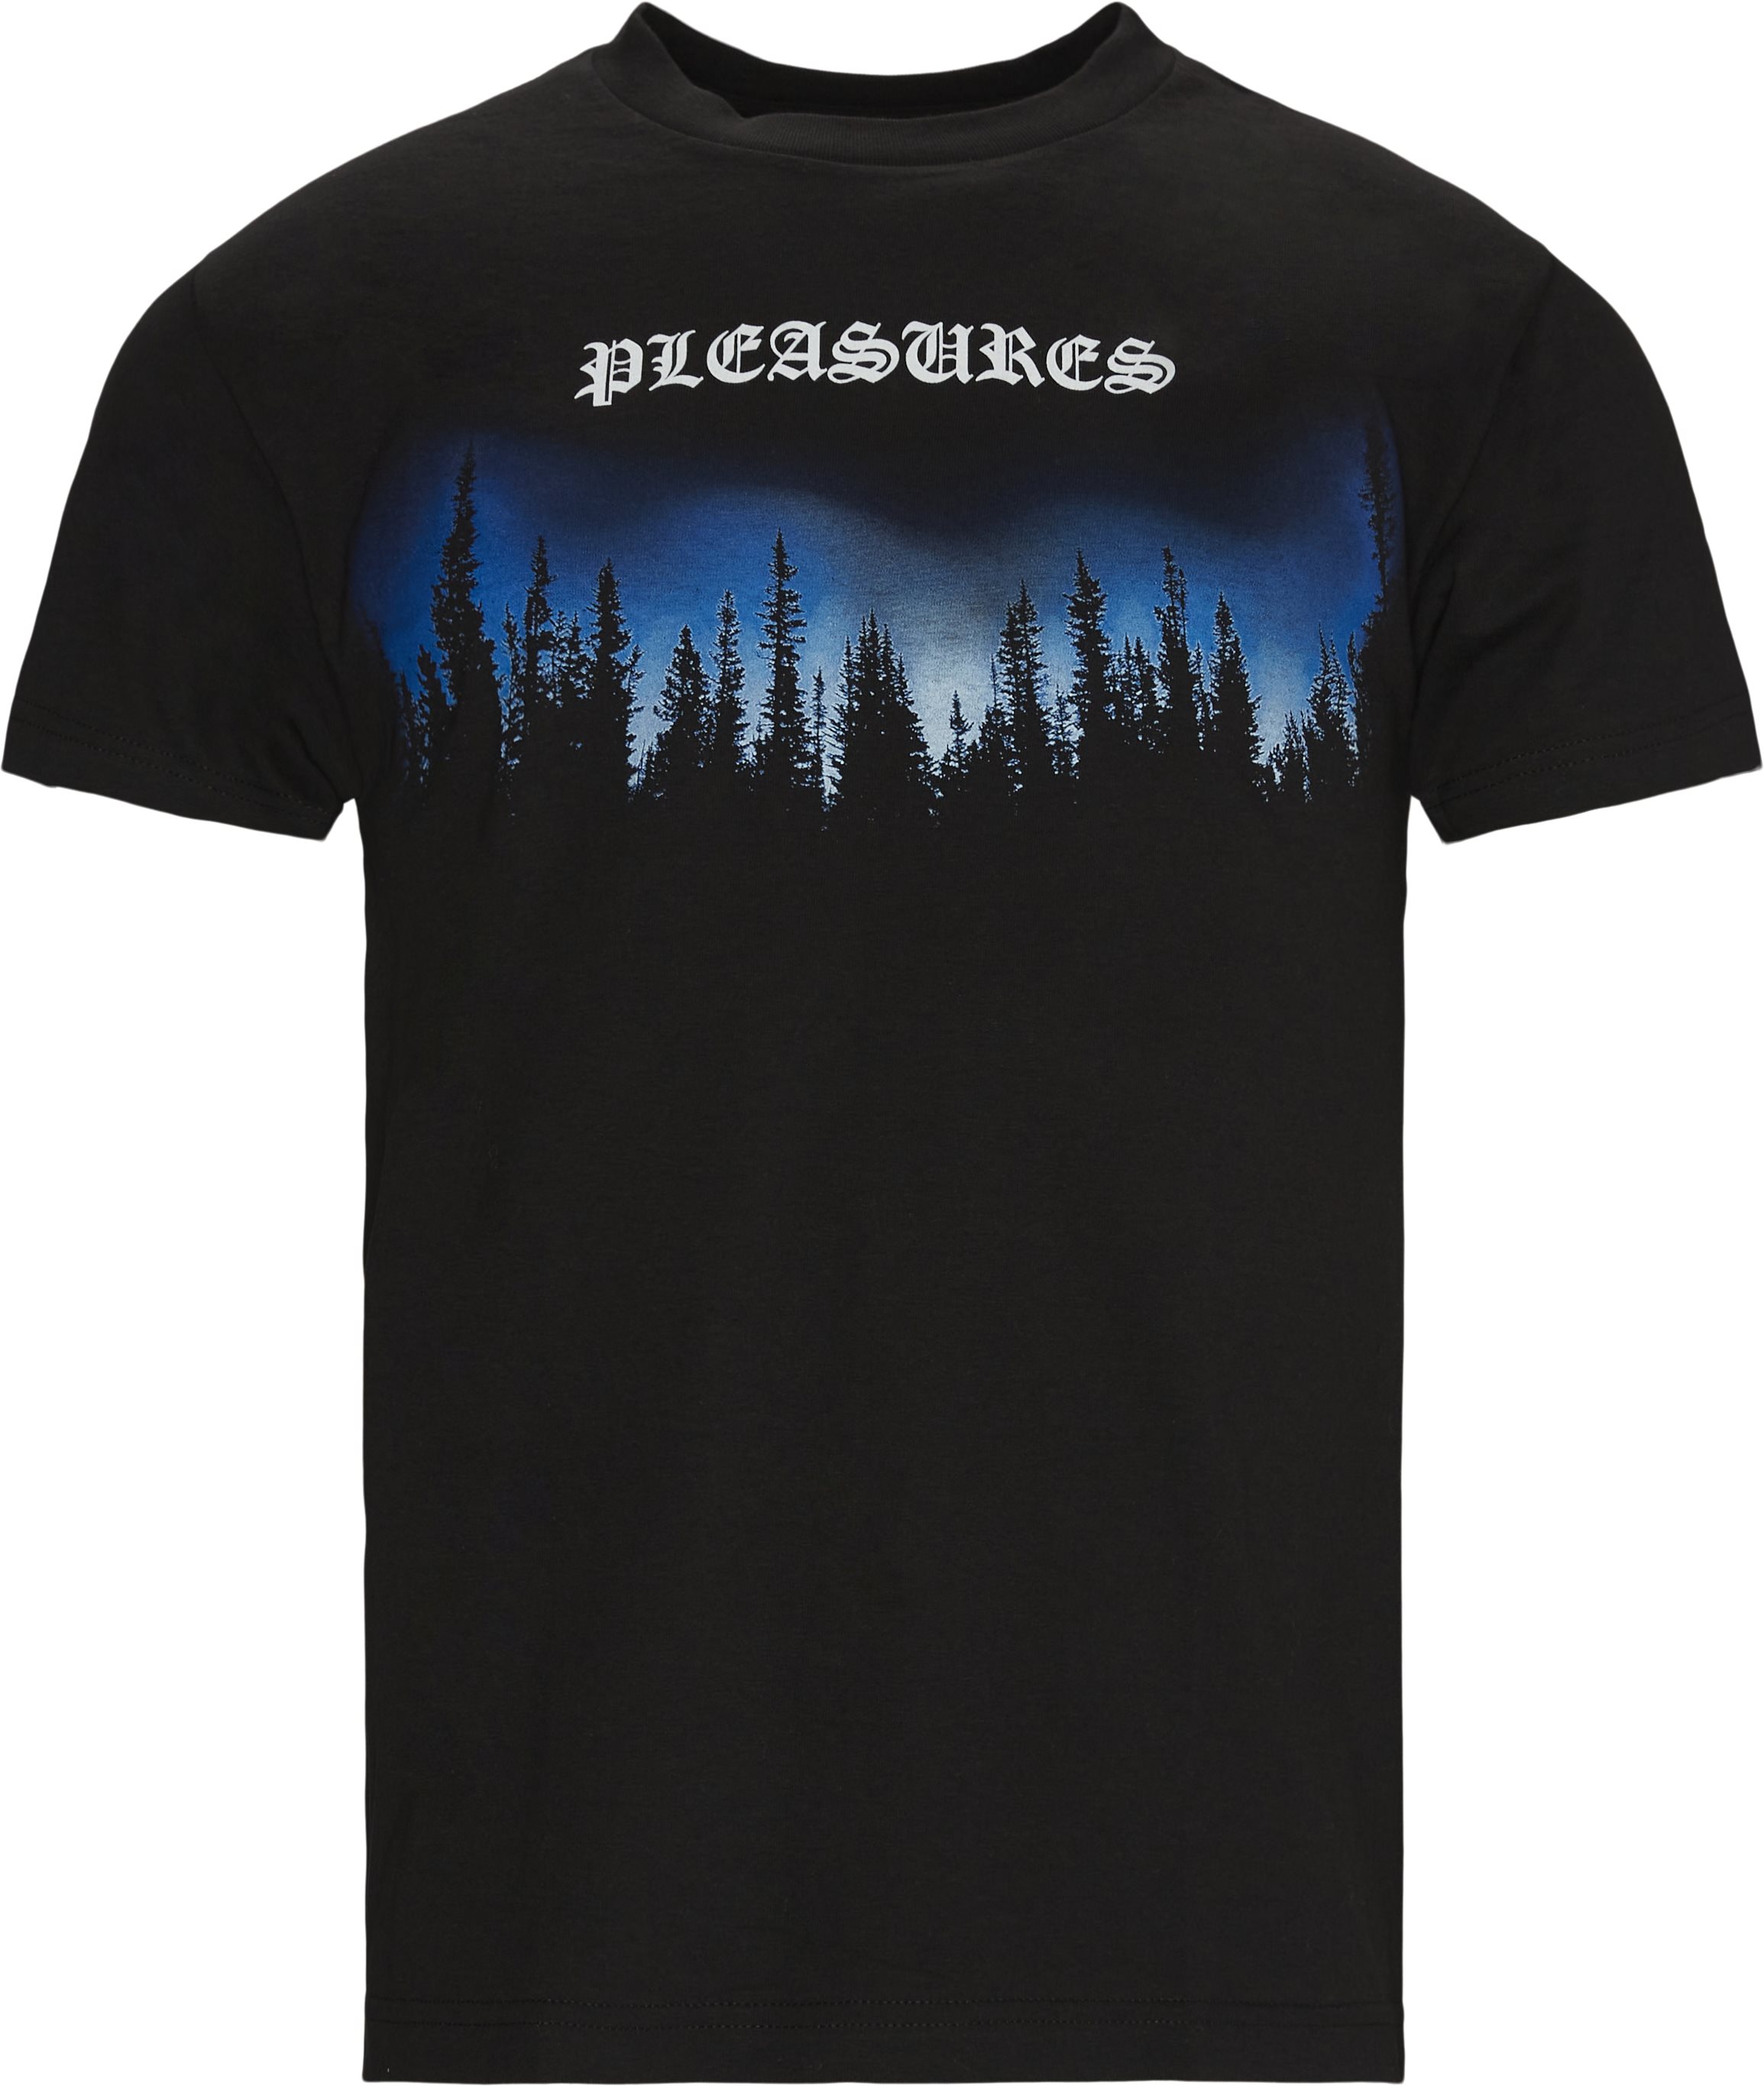 Pleasures T-shirts FOREST TEE Black